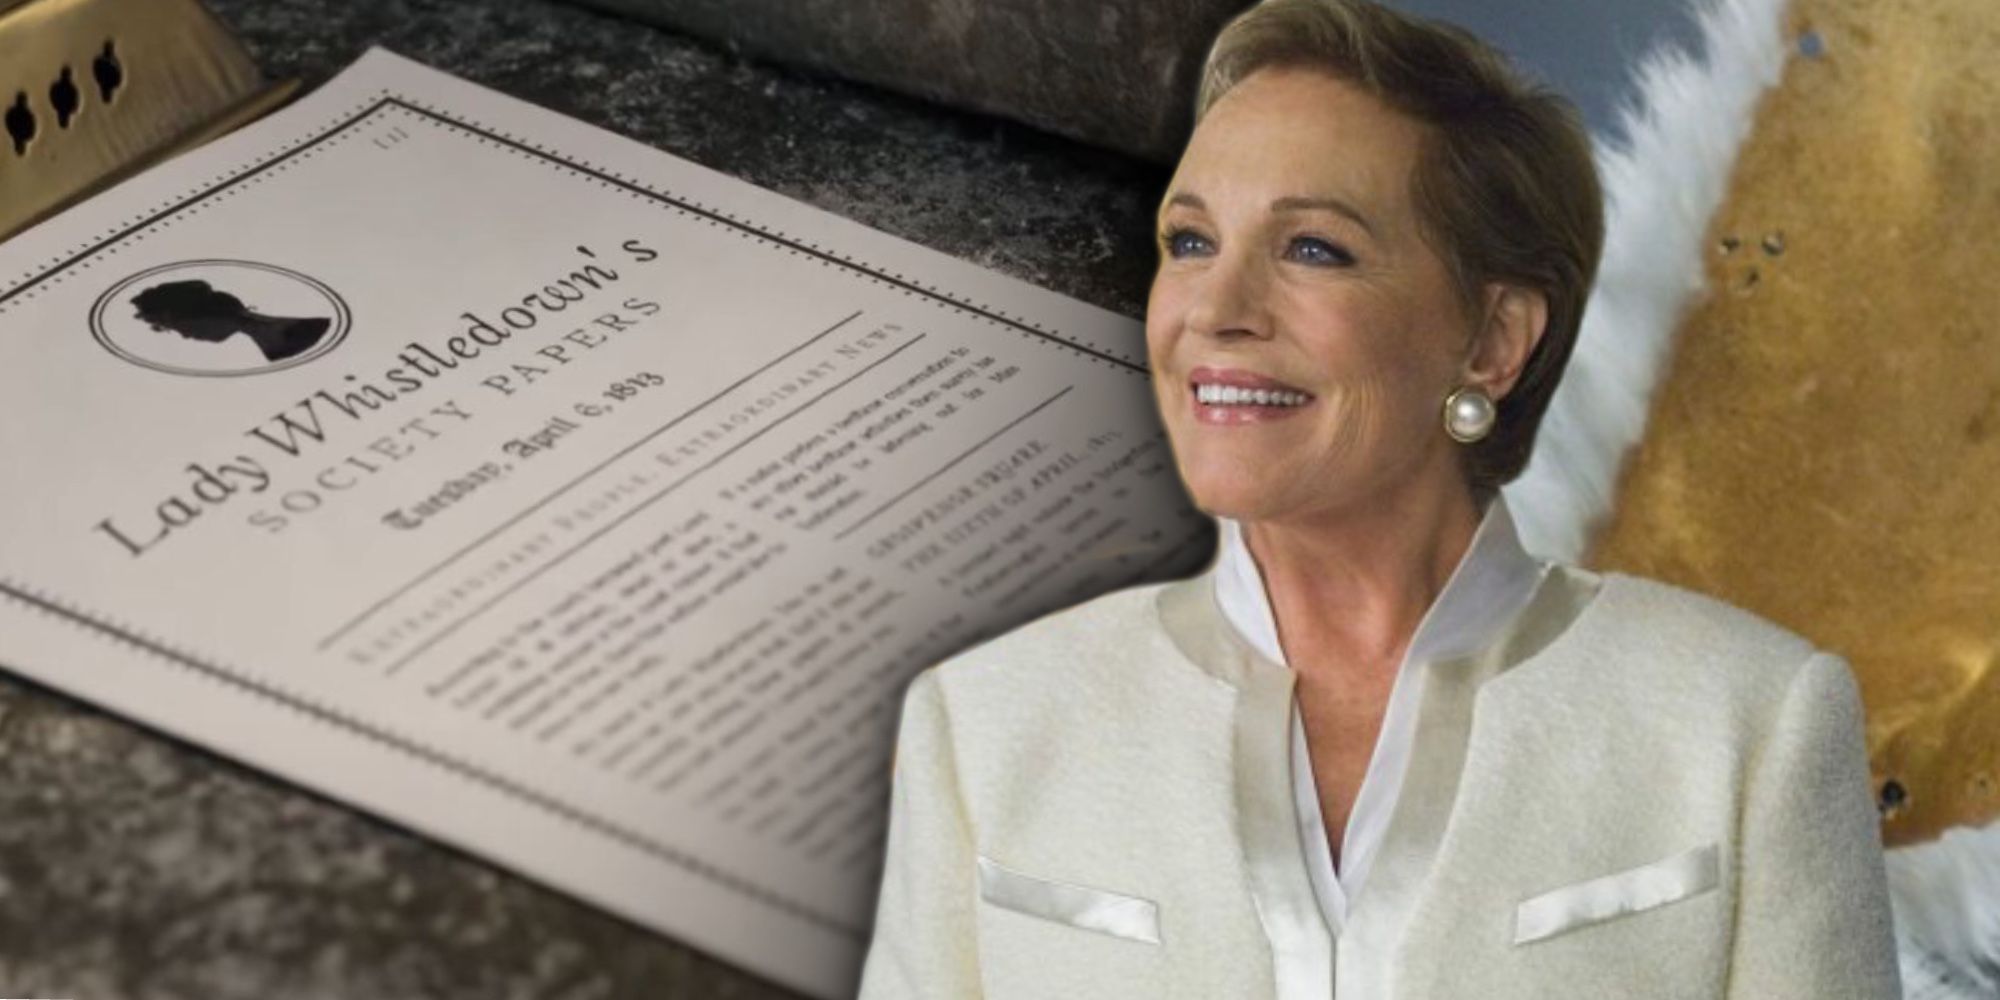 An image of Julie Andrews superimposed on Lady Whistledown's letter in Bridgerton.